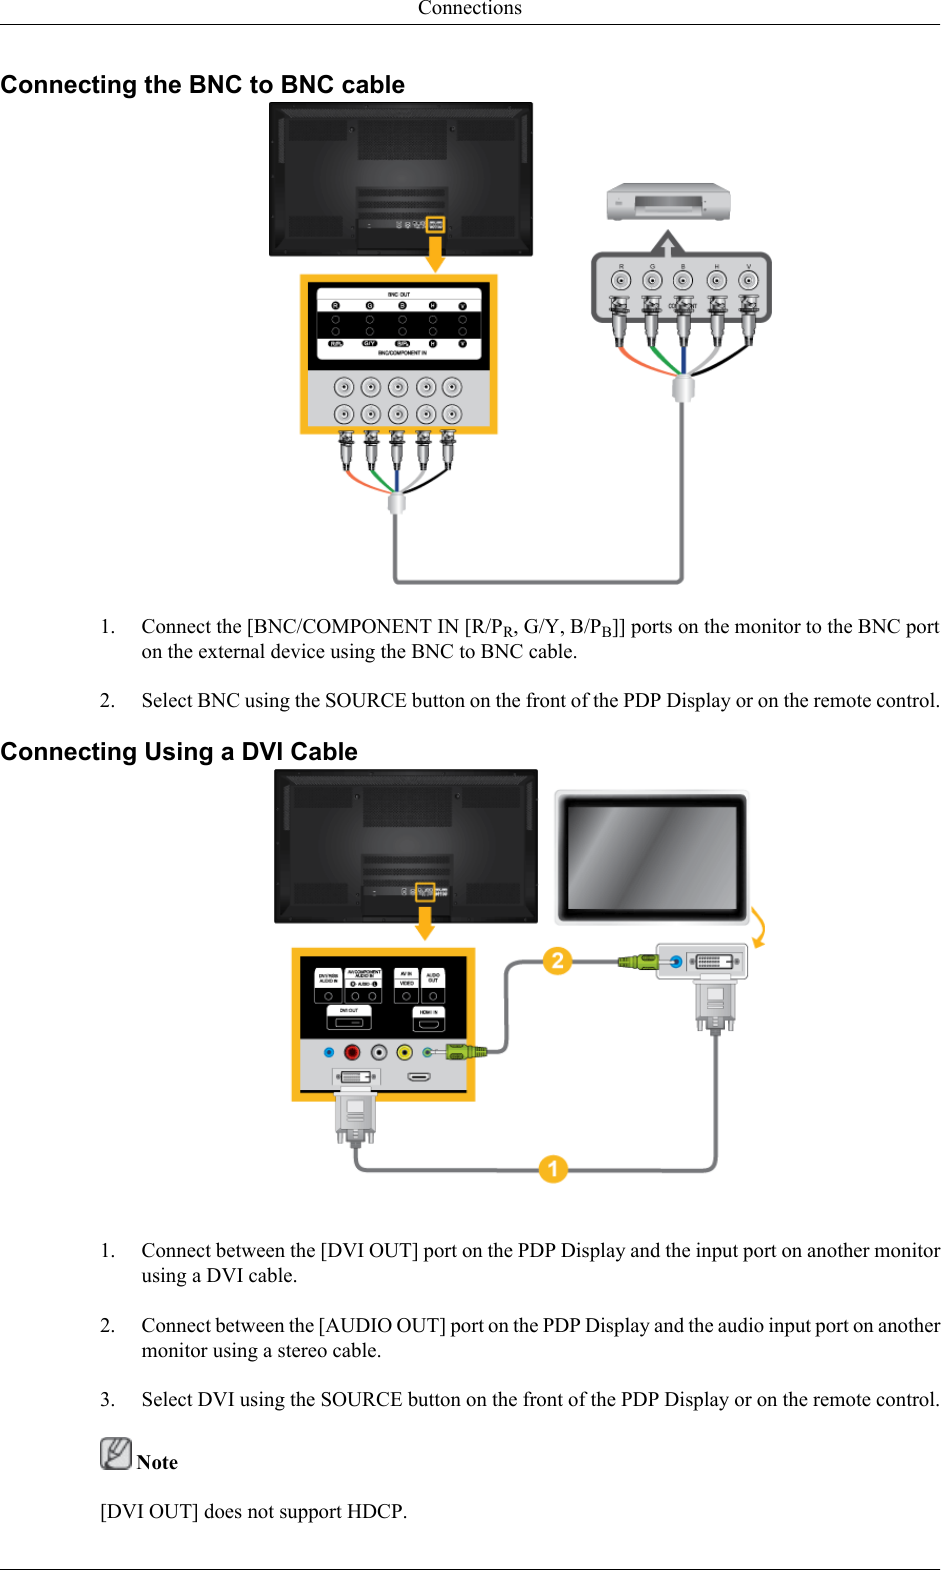 Connecting the BNC to BNC cable1. Connect the [BNC/COMPONENT IN [R/PR, G/Y, B/PB]] ports on the monitor to the BNC porton the external device using the BNC to BNC cable.2. Select BNC using the SOURCE button on the front of the PDP Display or on the remote control.Connecting Using a DVI Cable1. Connect between the [DVI OUT] port on the PDP Display and the input port on another monitorusing a DVI cable.2. Connect between the [AUDIO OUT] port on the PDP Display and the audio input port on anothermonitor using a stereo cable.3. Select DVI using the SOURCE button on the front of the PDP Display or on the remote control. Note[DVI OUT] does not support HDCP.Connections